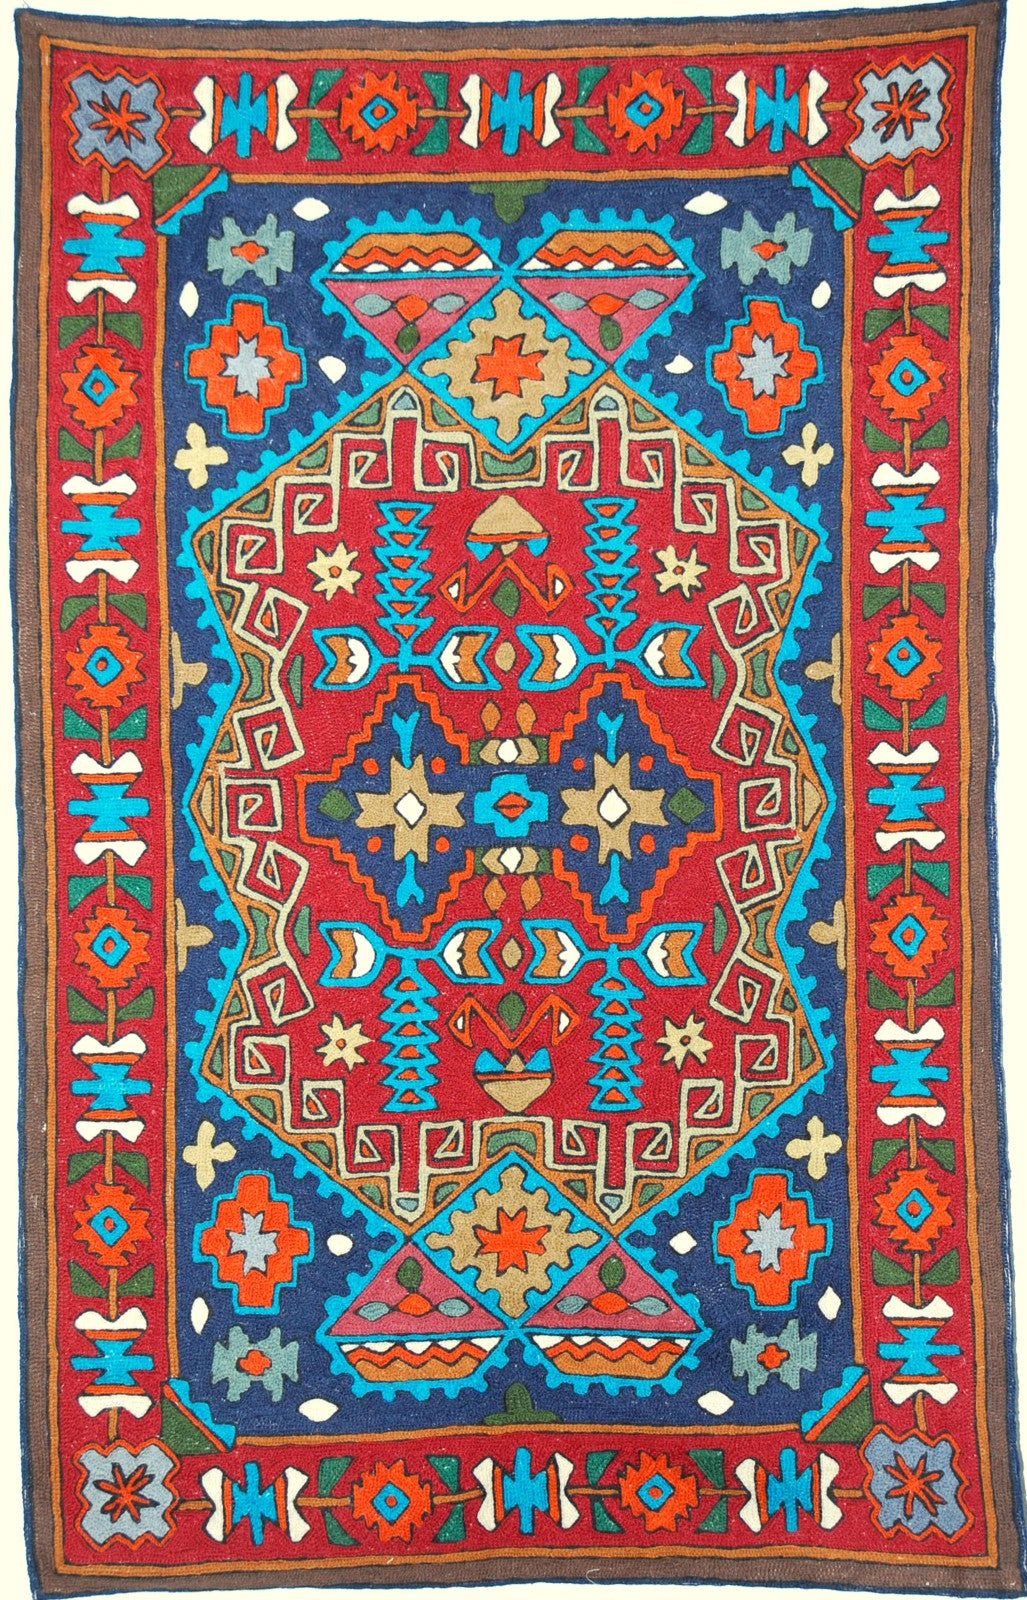 ChainStitch Tapestry Kilim Woolen Area Rug, Multicolor Embroidery